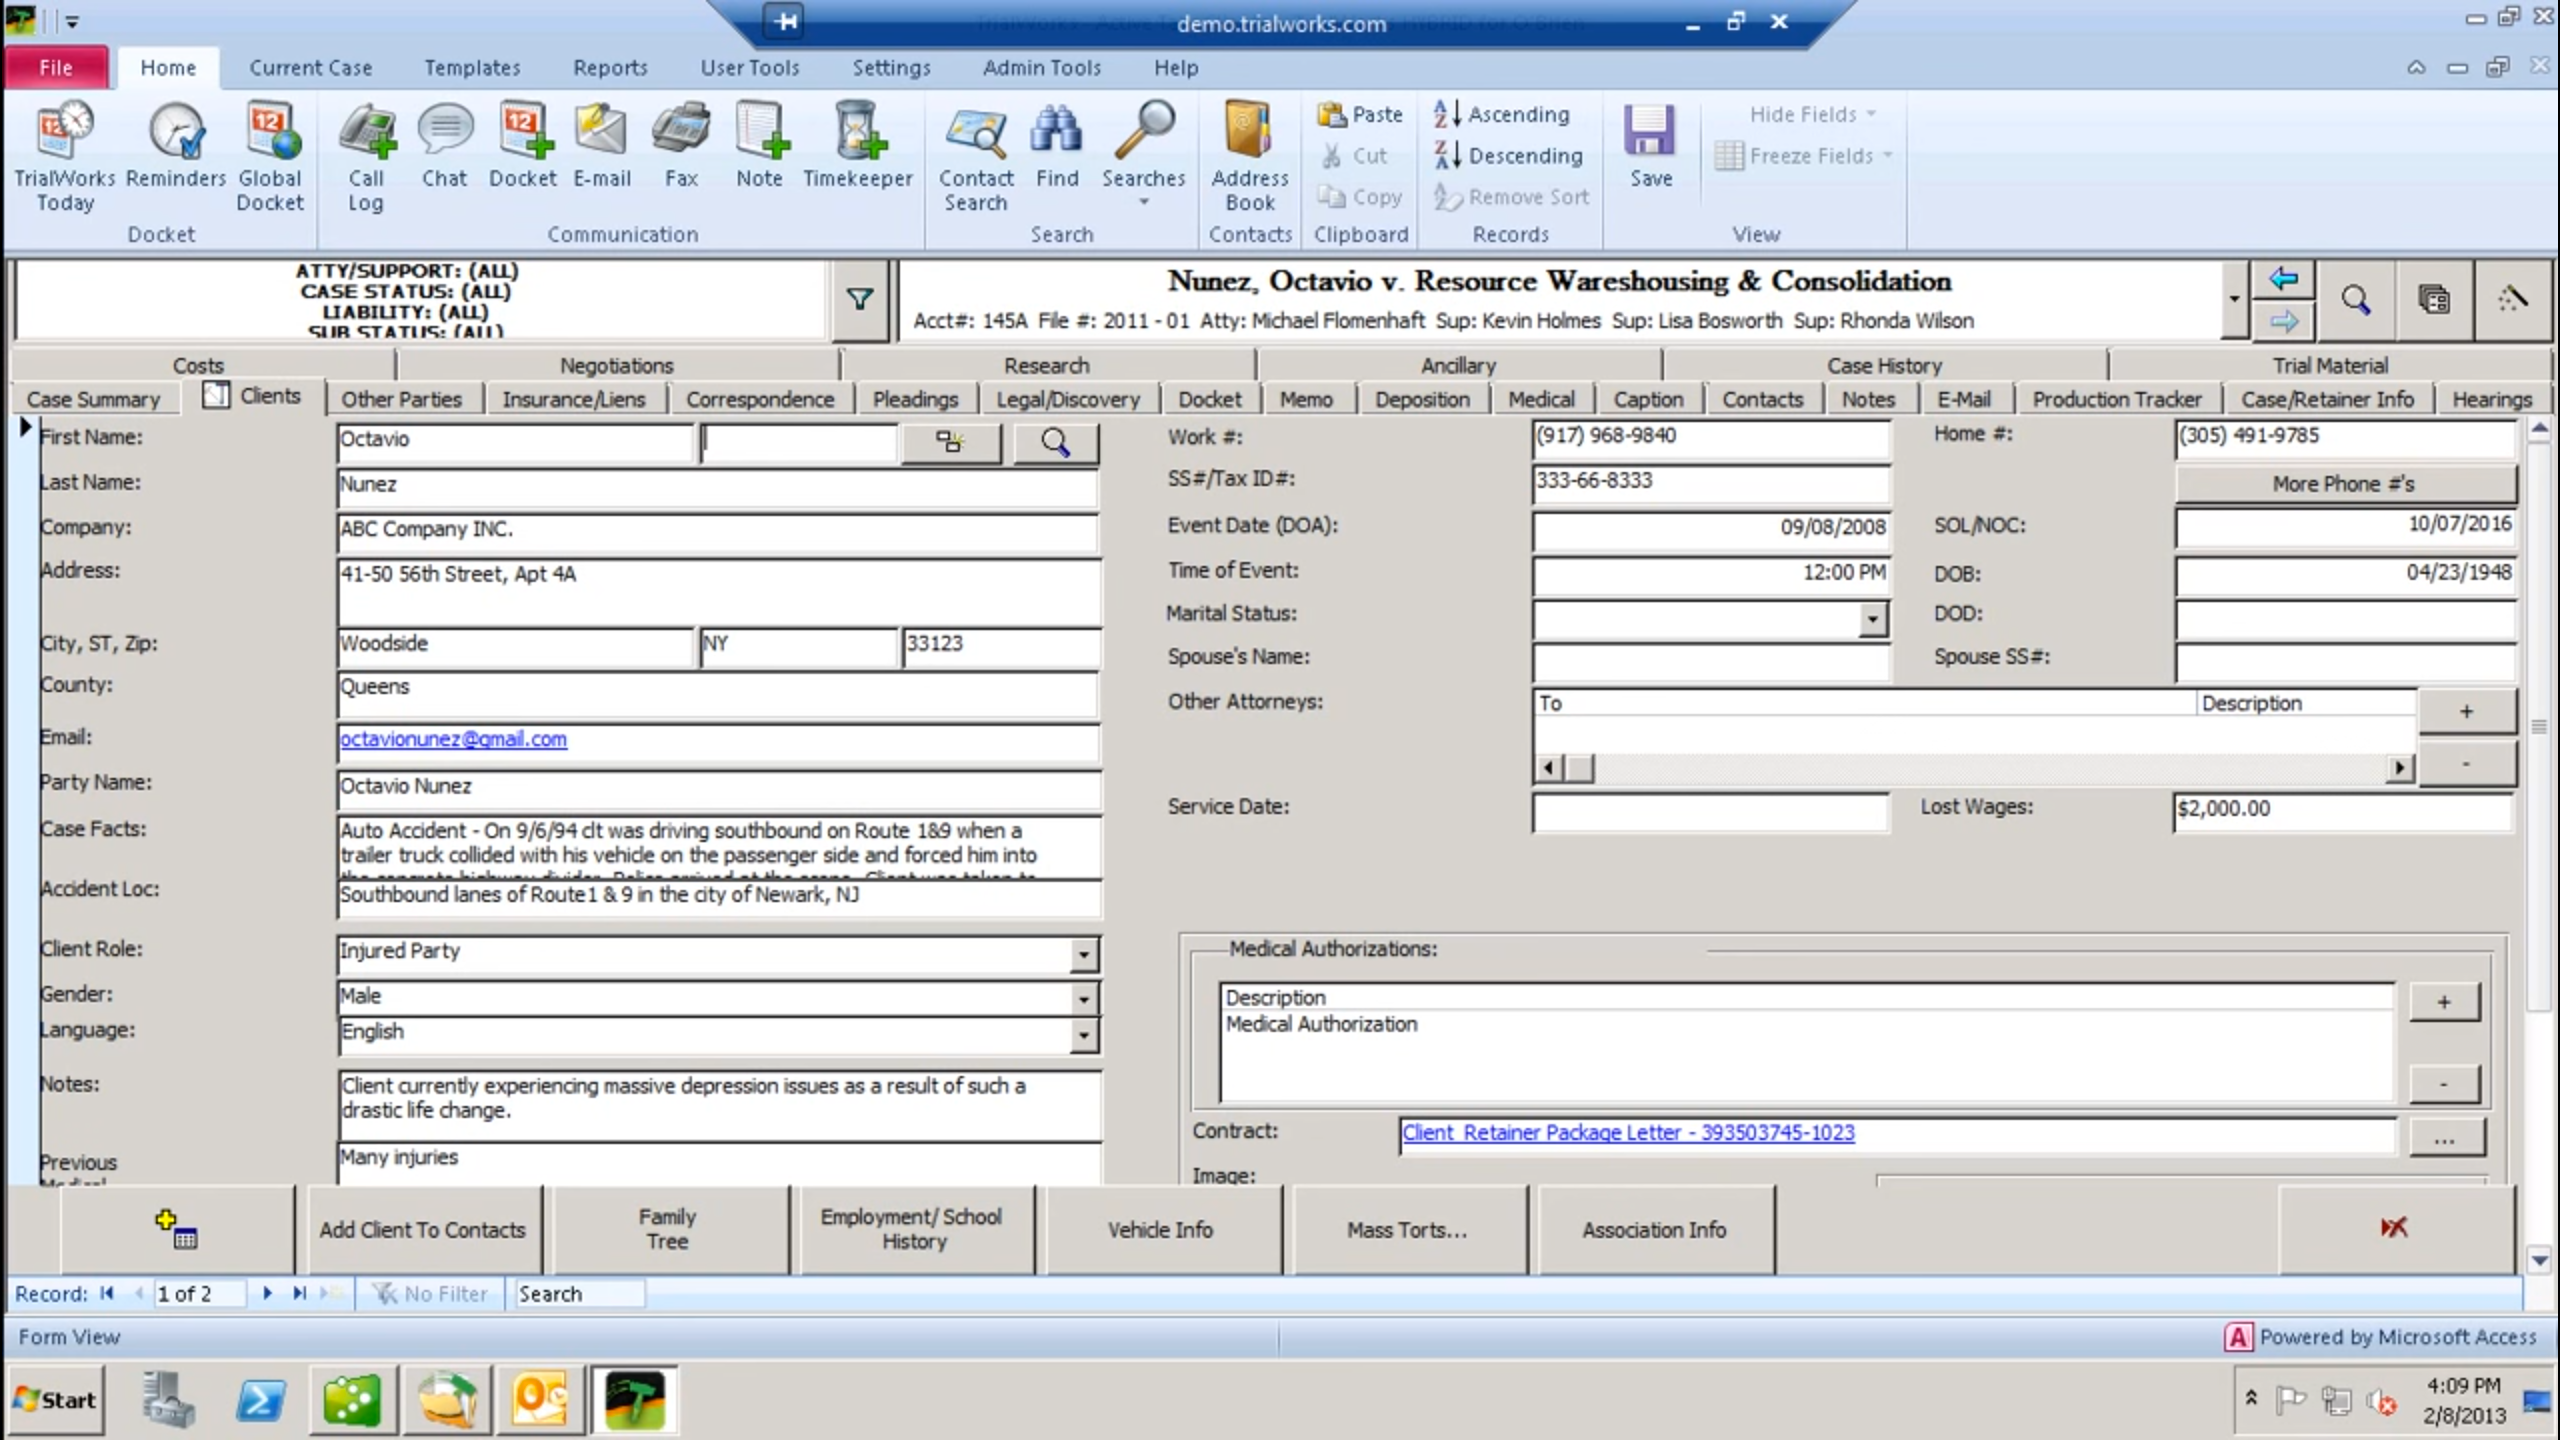 TrialWorks Software - Matter intake is simplified thanks to the client entry screen